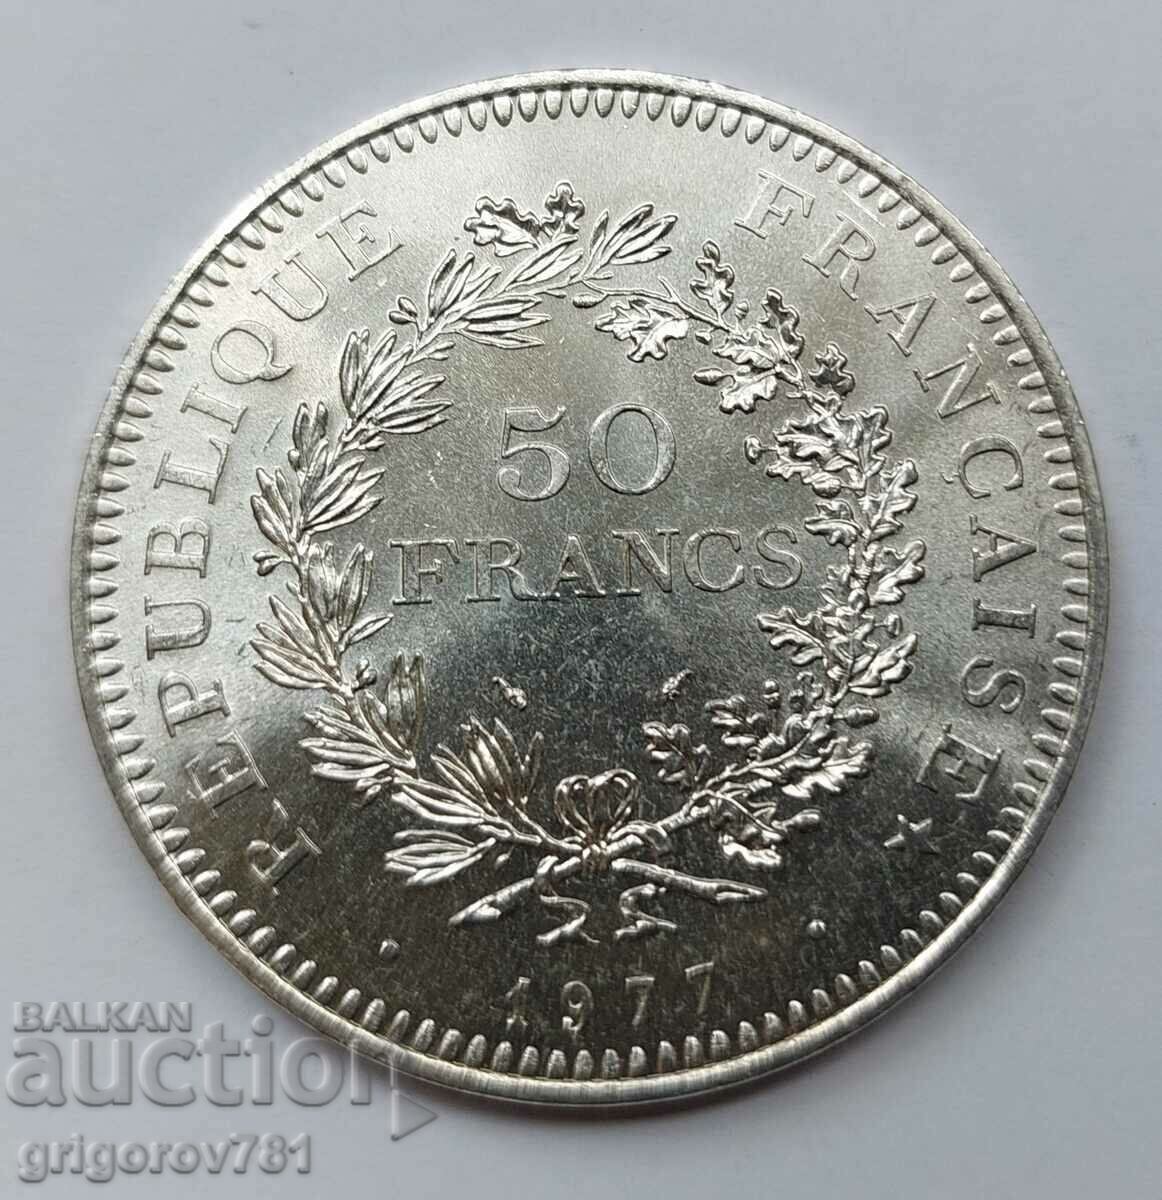 50 Francs Silver France 1977 - Silver Coin #46